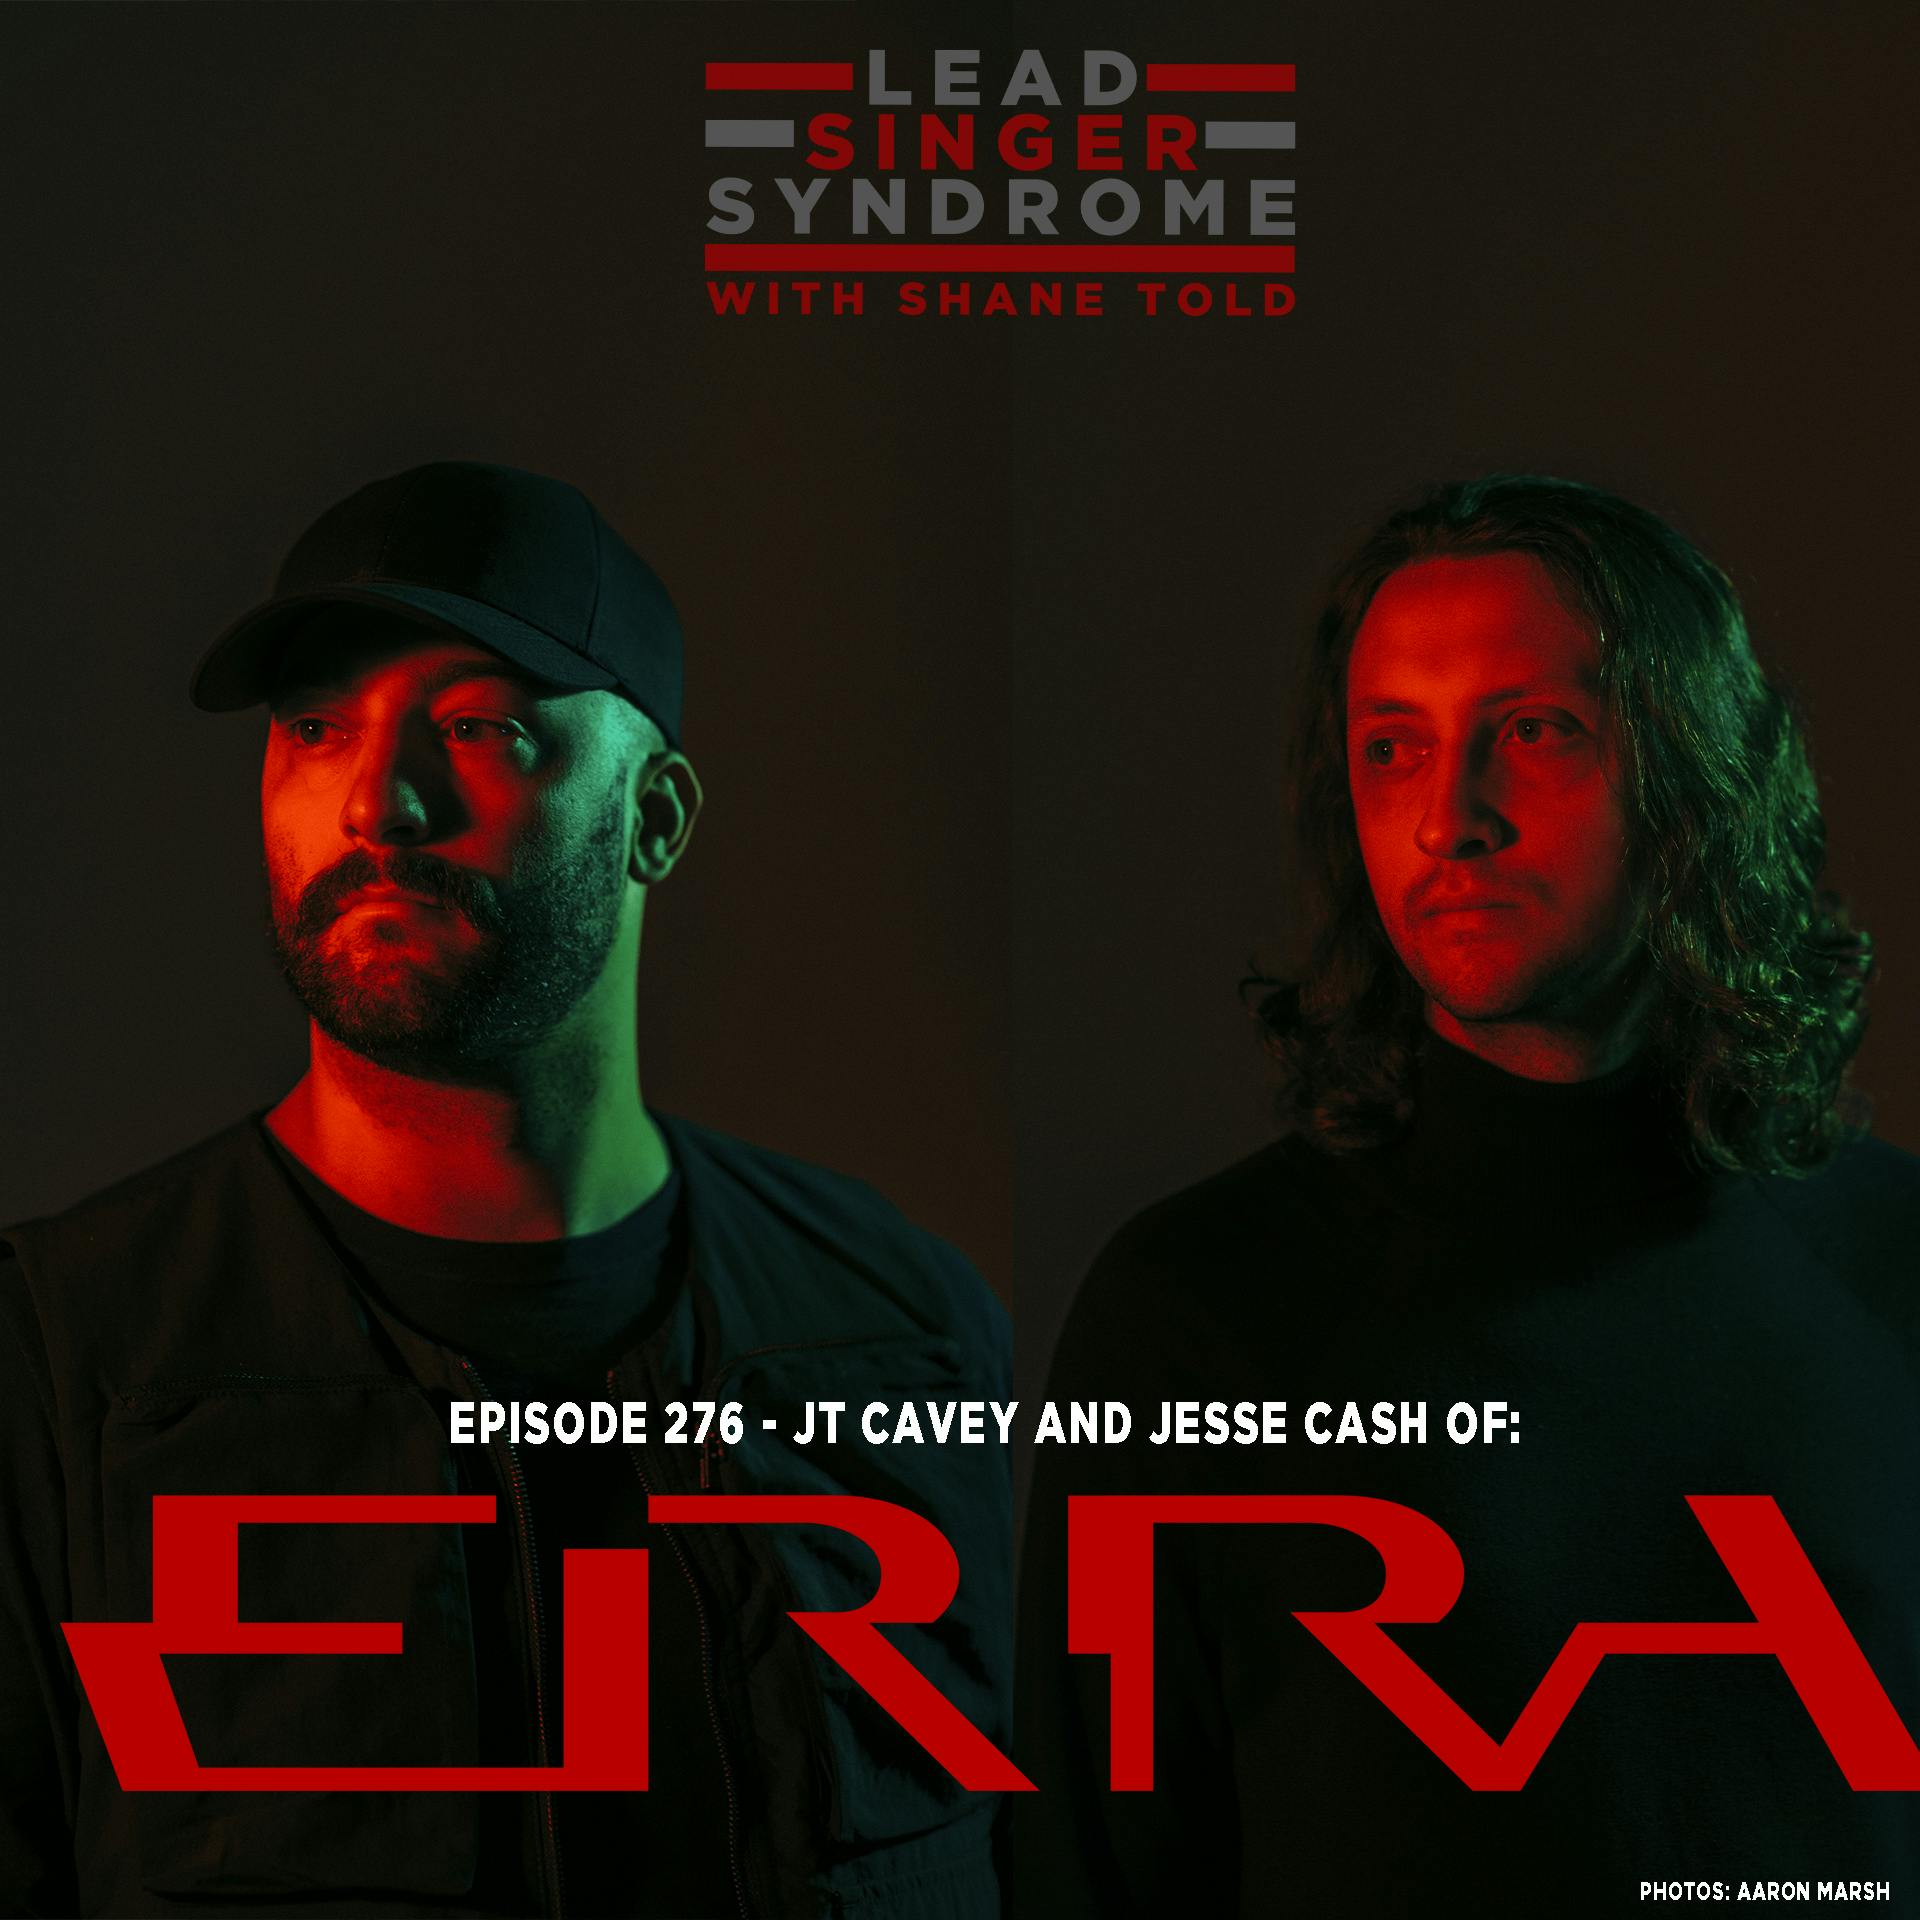 ERRA (JT Cavey and Jesse Cash) with guest co-host Mike Howell